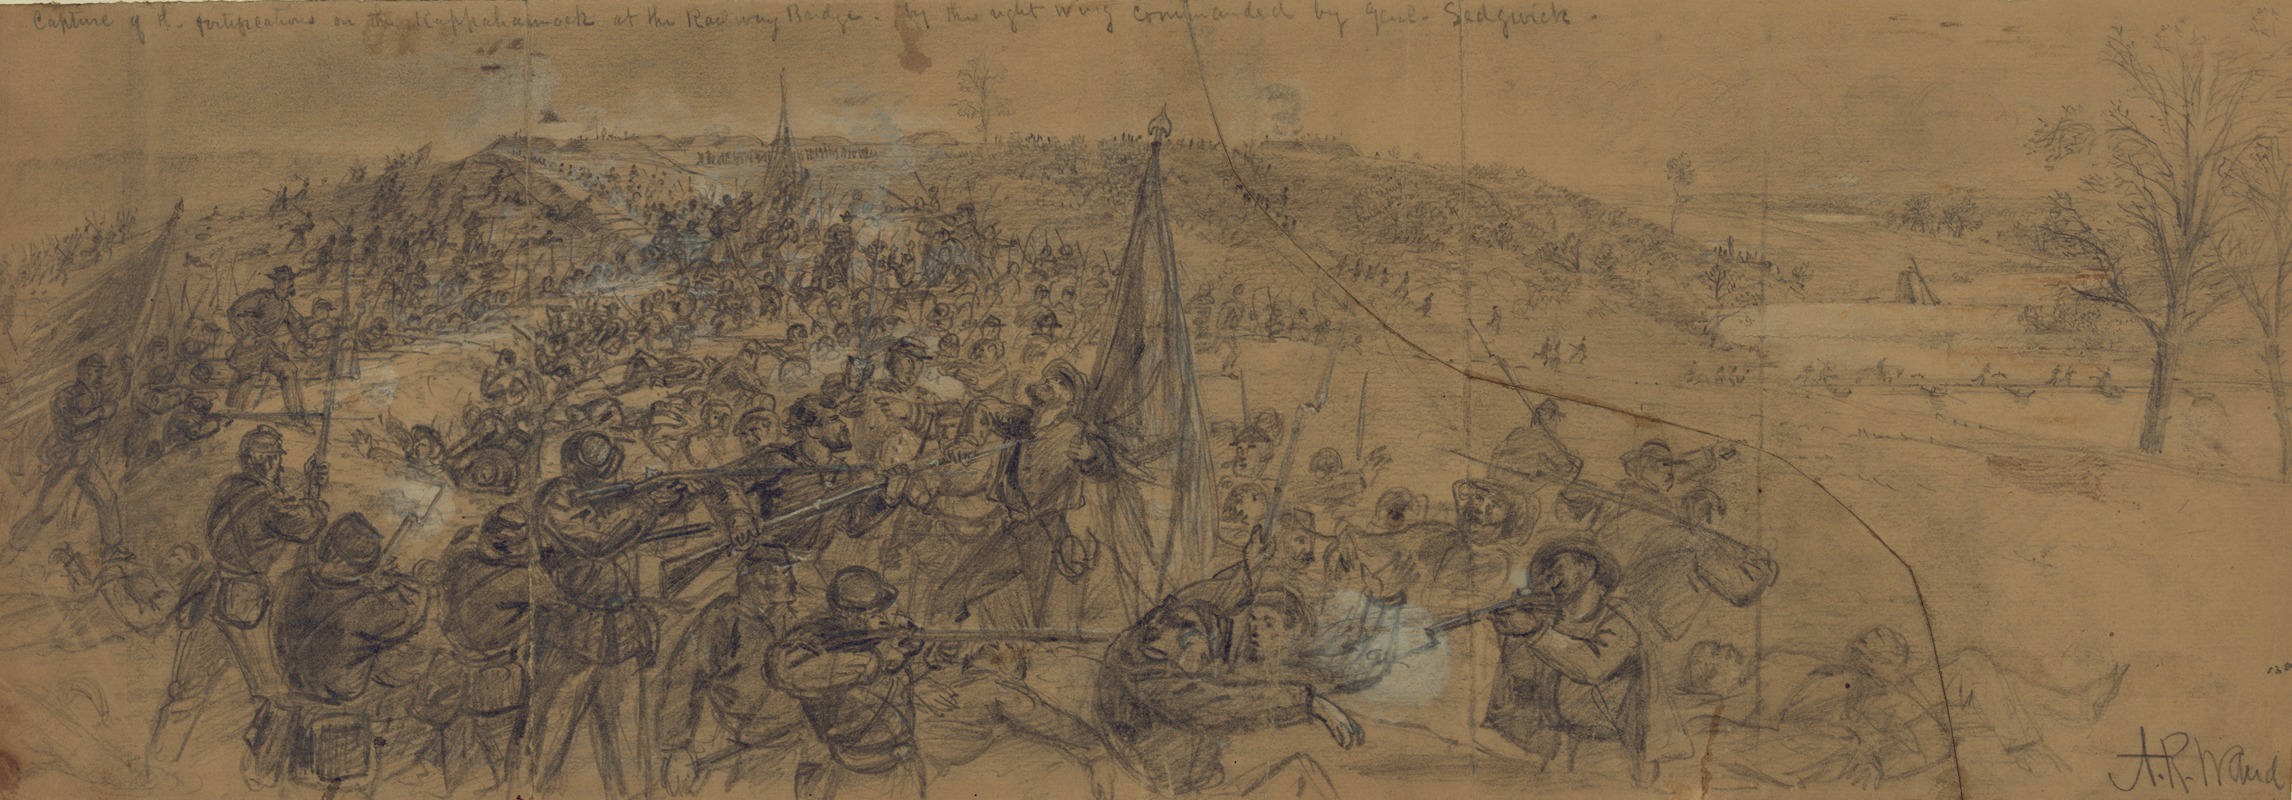 Alfred Rudolph Waud - Capture of the fortifications on the Rappahannock at the Railway Bridge–by the right wing commanded by Genl. Sedgwick